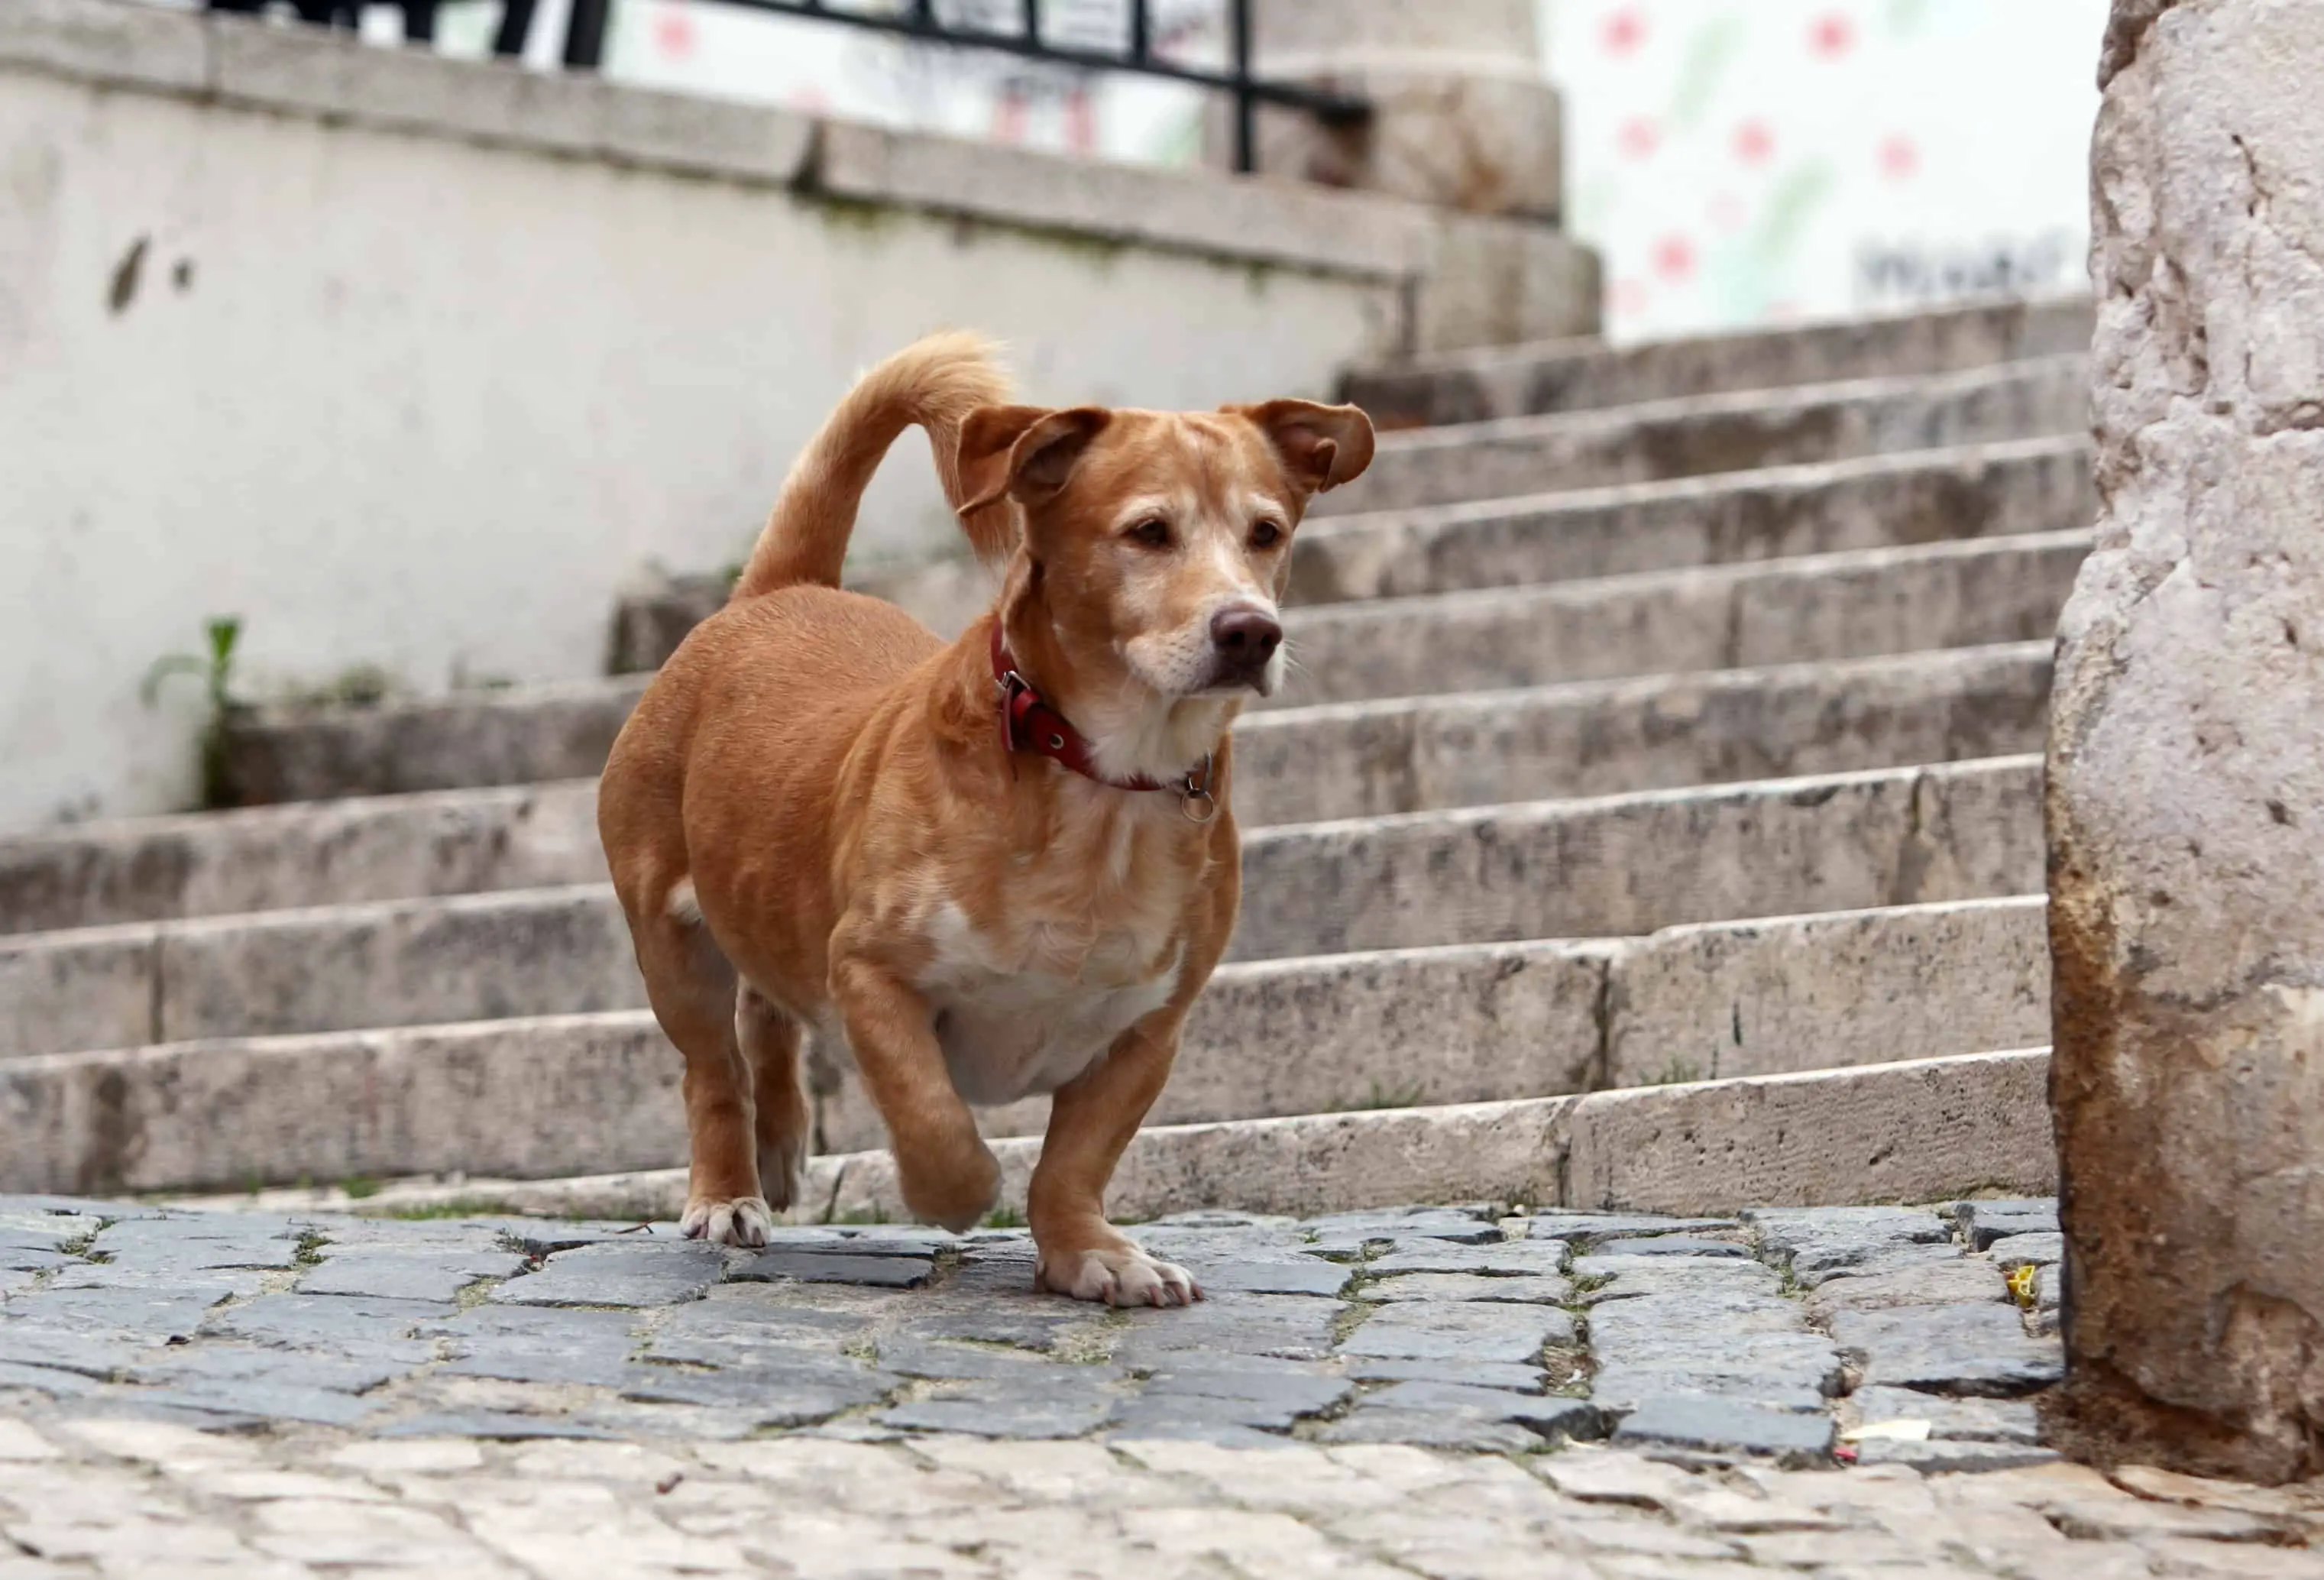 Are Stairs Bad For Puppy Hips?